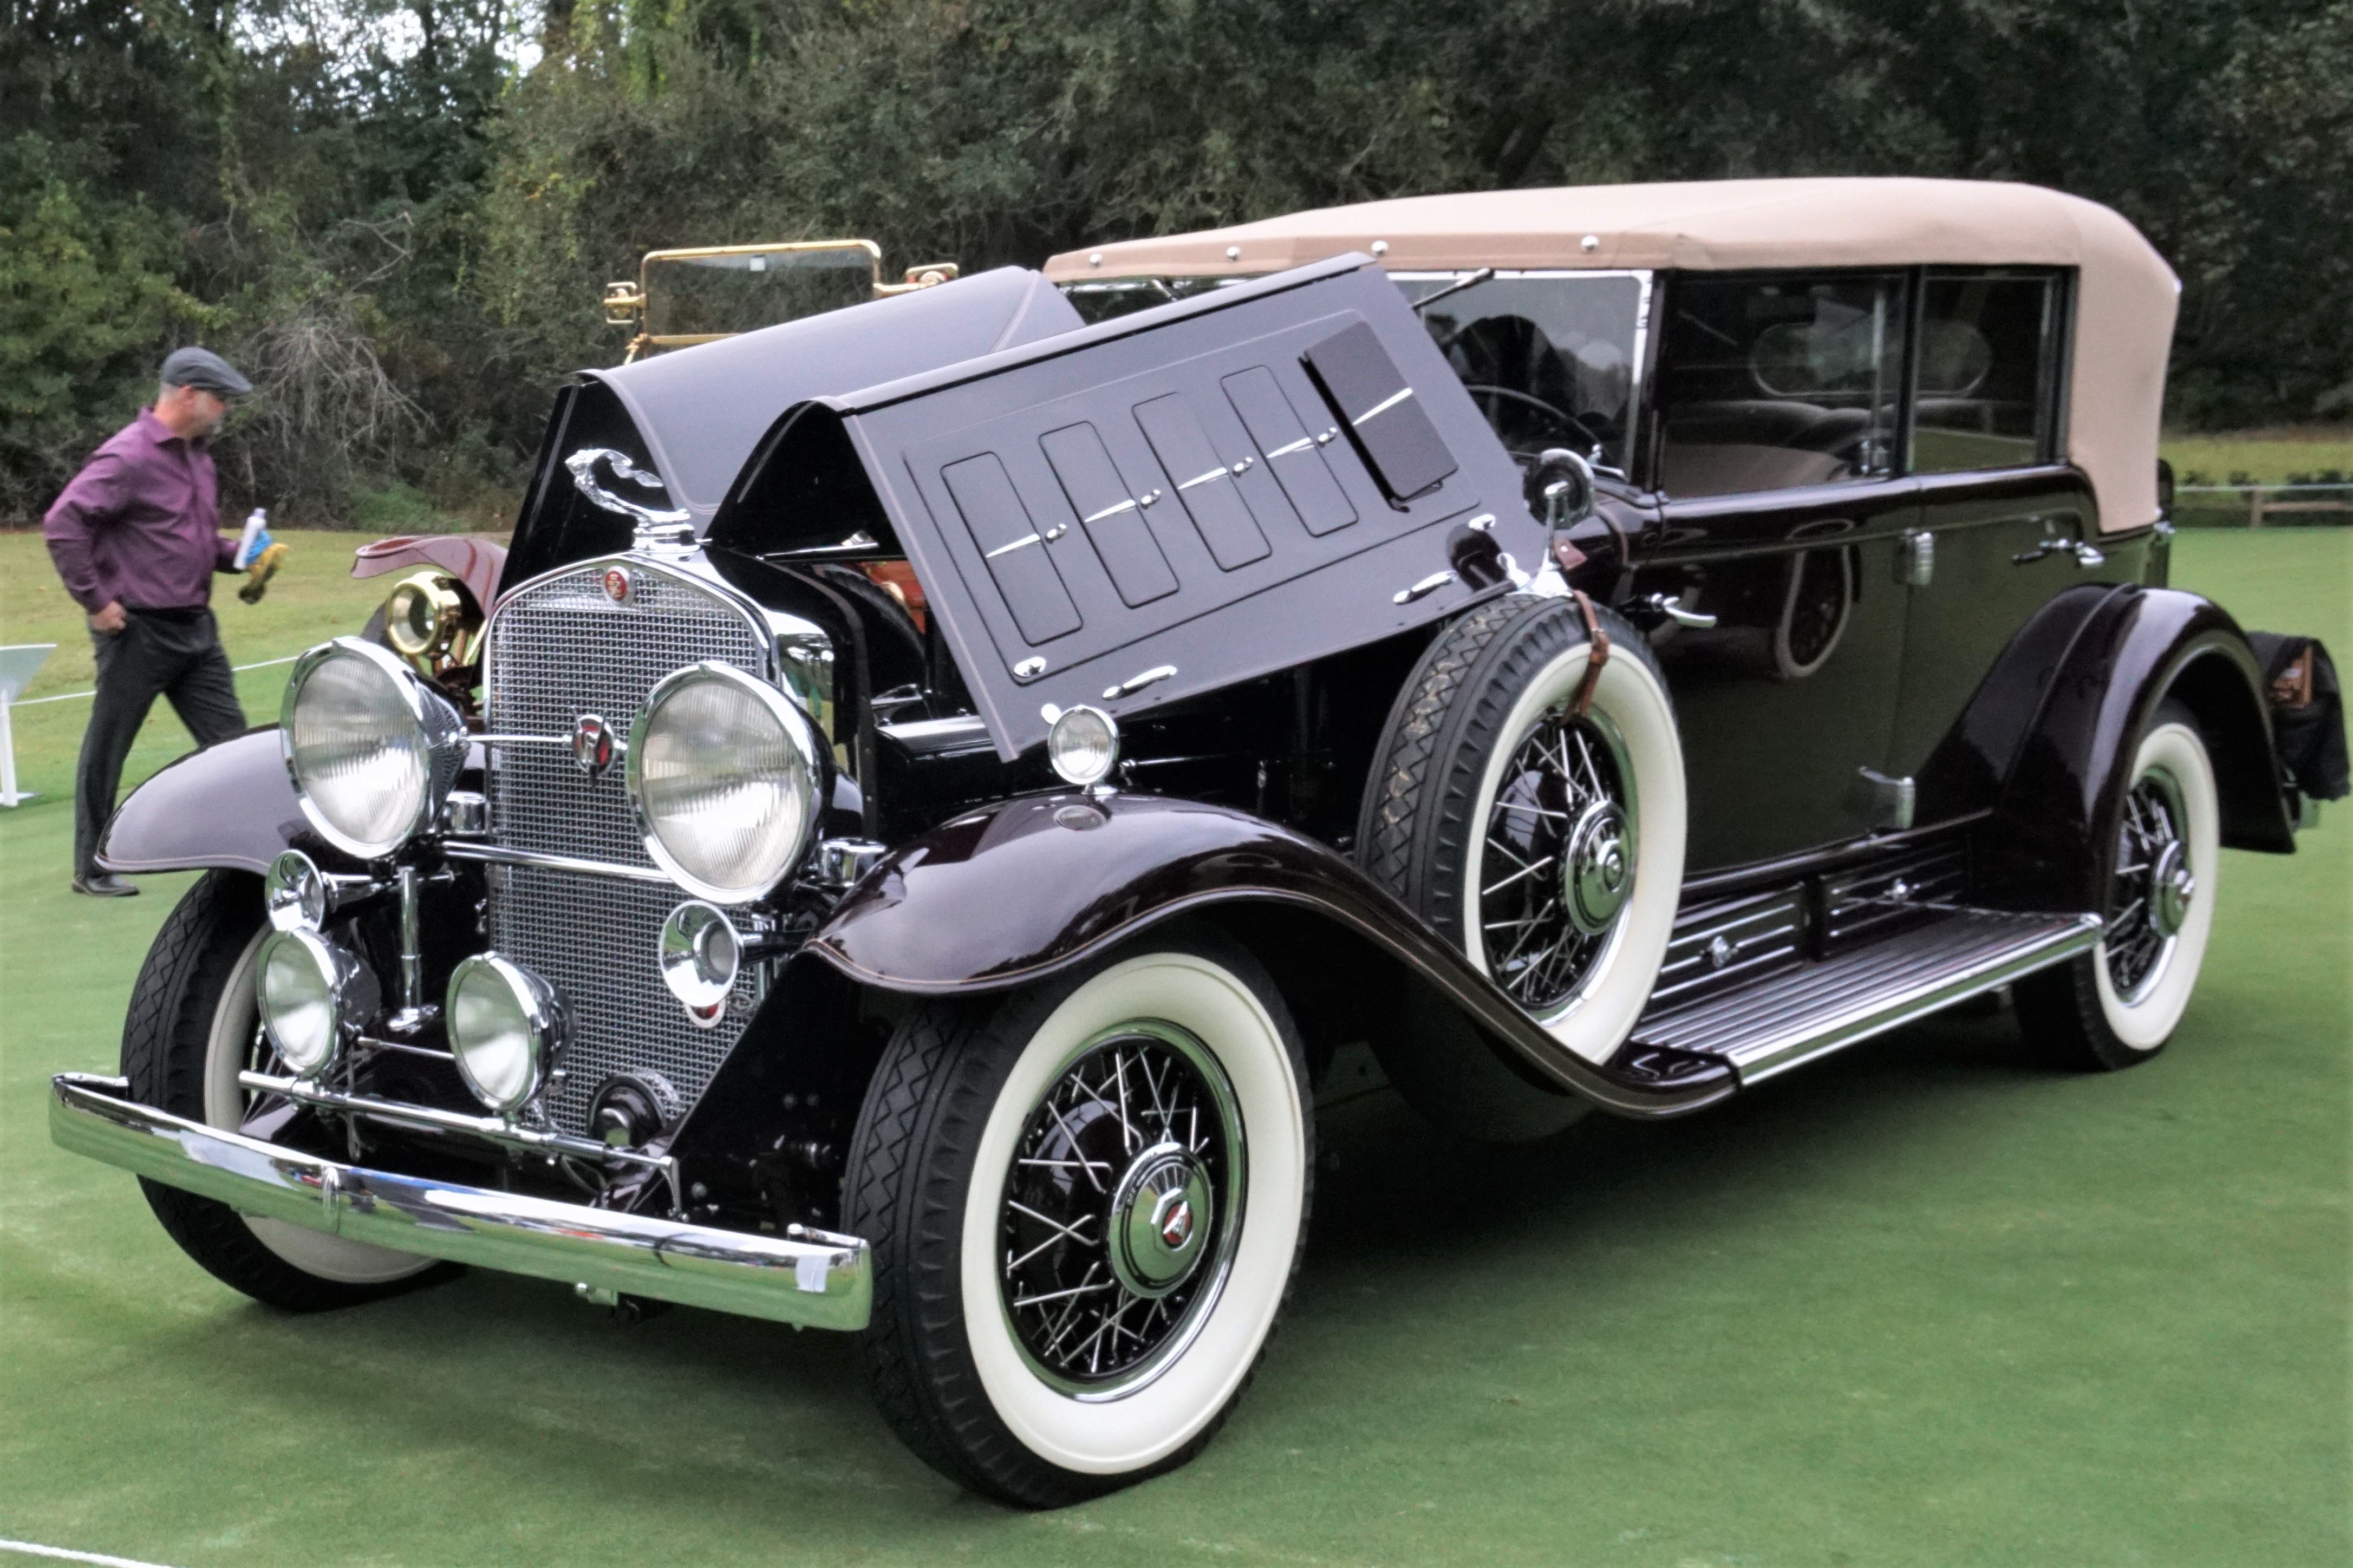 Hilton Head, Hilton Head Concours grows, impresses with terrific array of vehicles and events , ClassicCars.com Journal